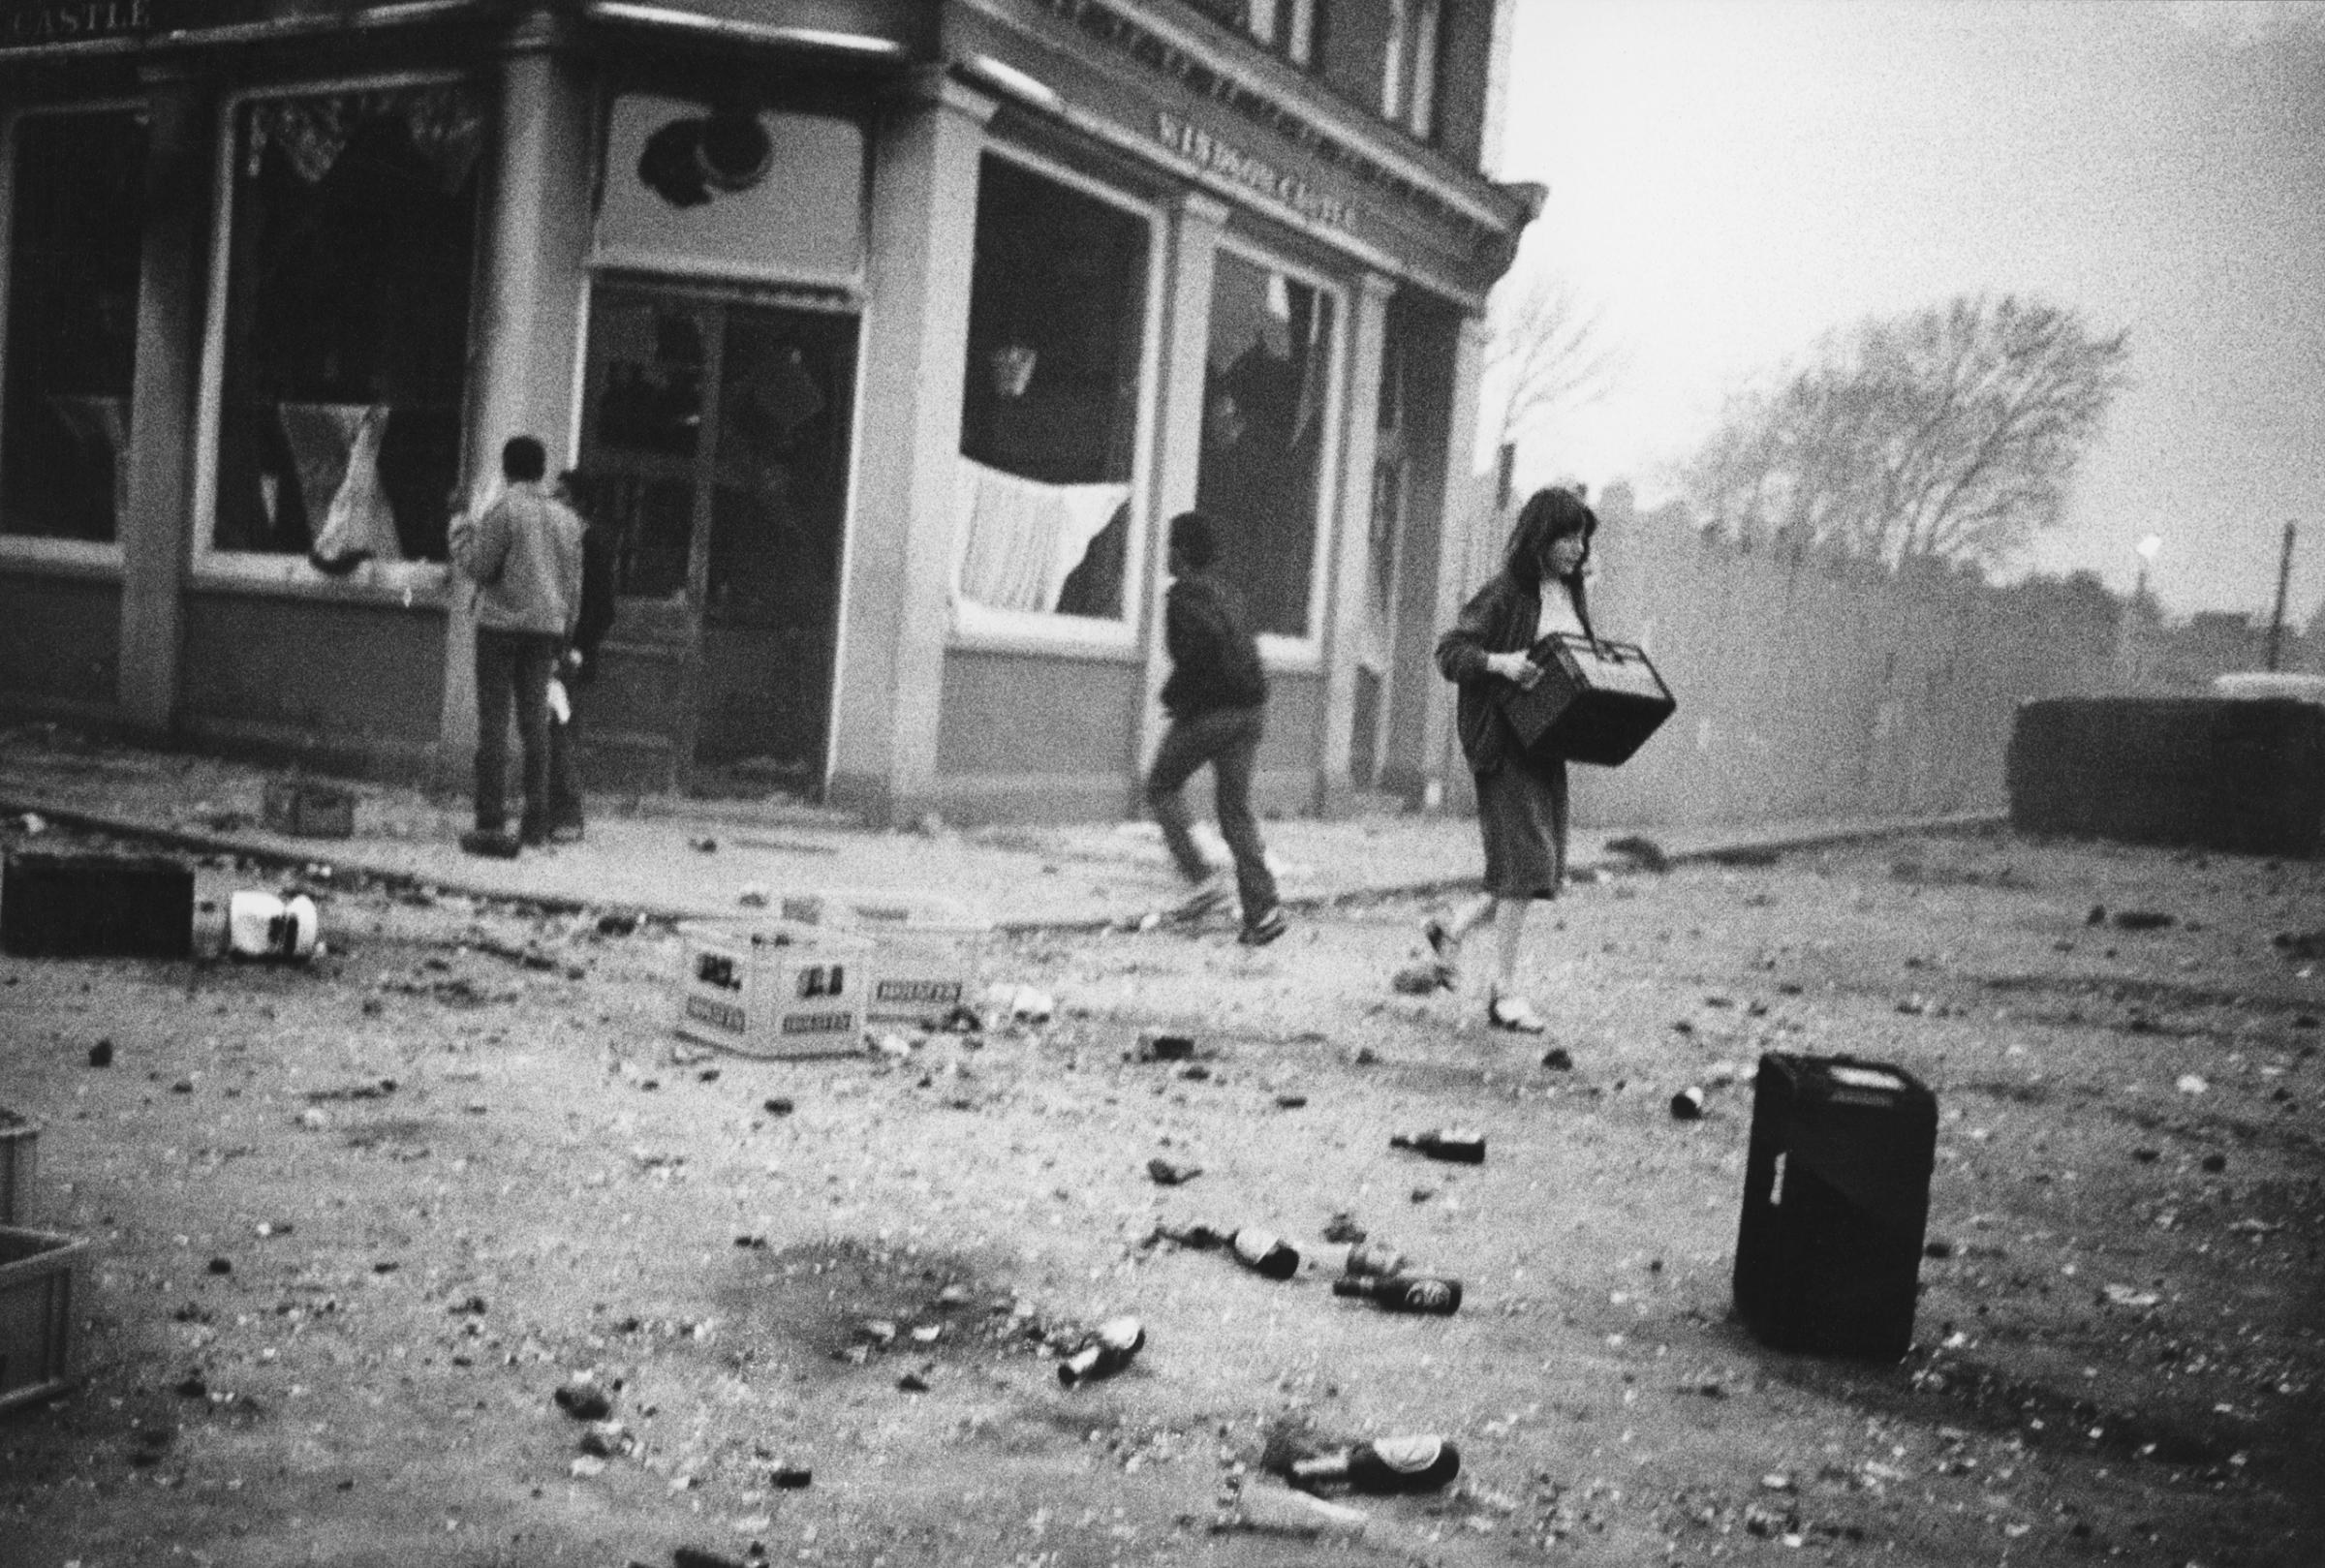 YOUNG LOCALS RELIEVING THE BURNED OUT LOCAL PUB 'THE WINDOW CASTLE' OF ITS CONTENTS ON THE FIRST NIGHT OF THE RIOTS, BRIXTON, APRIL, 1981